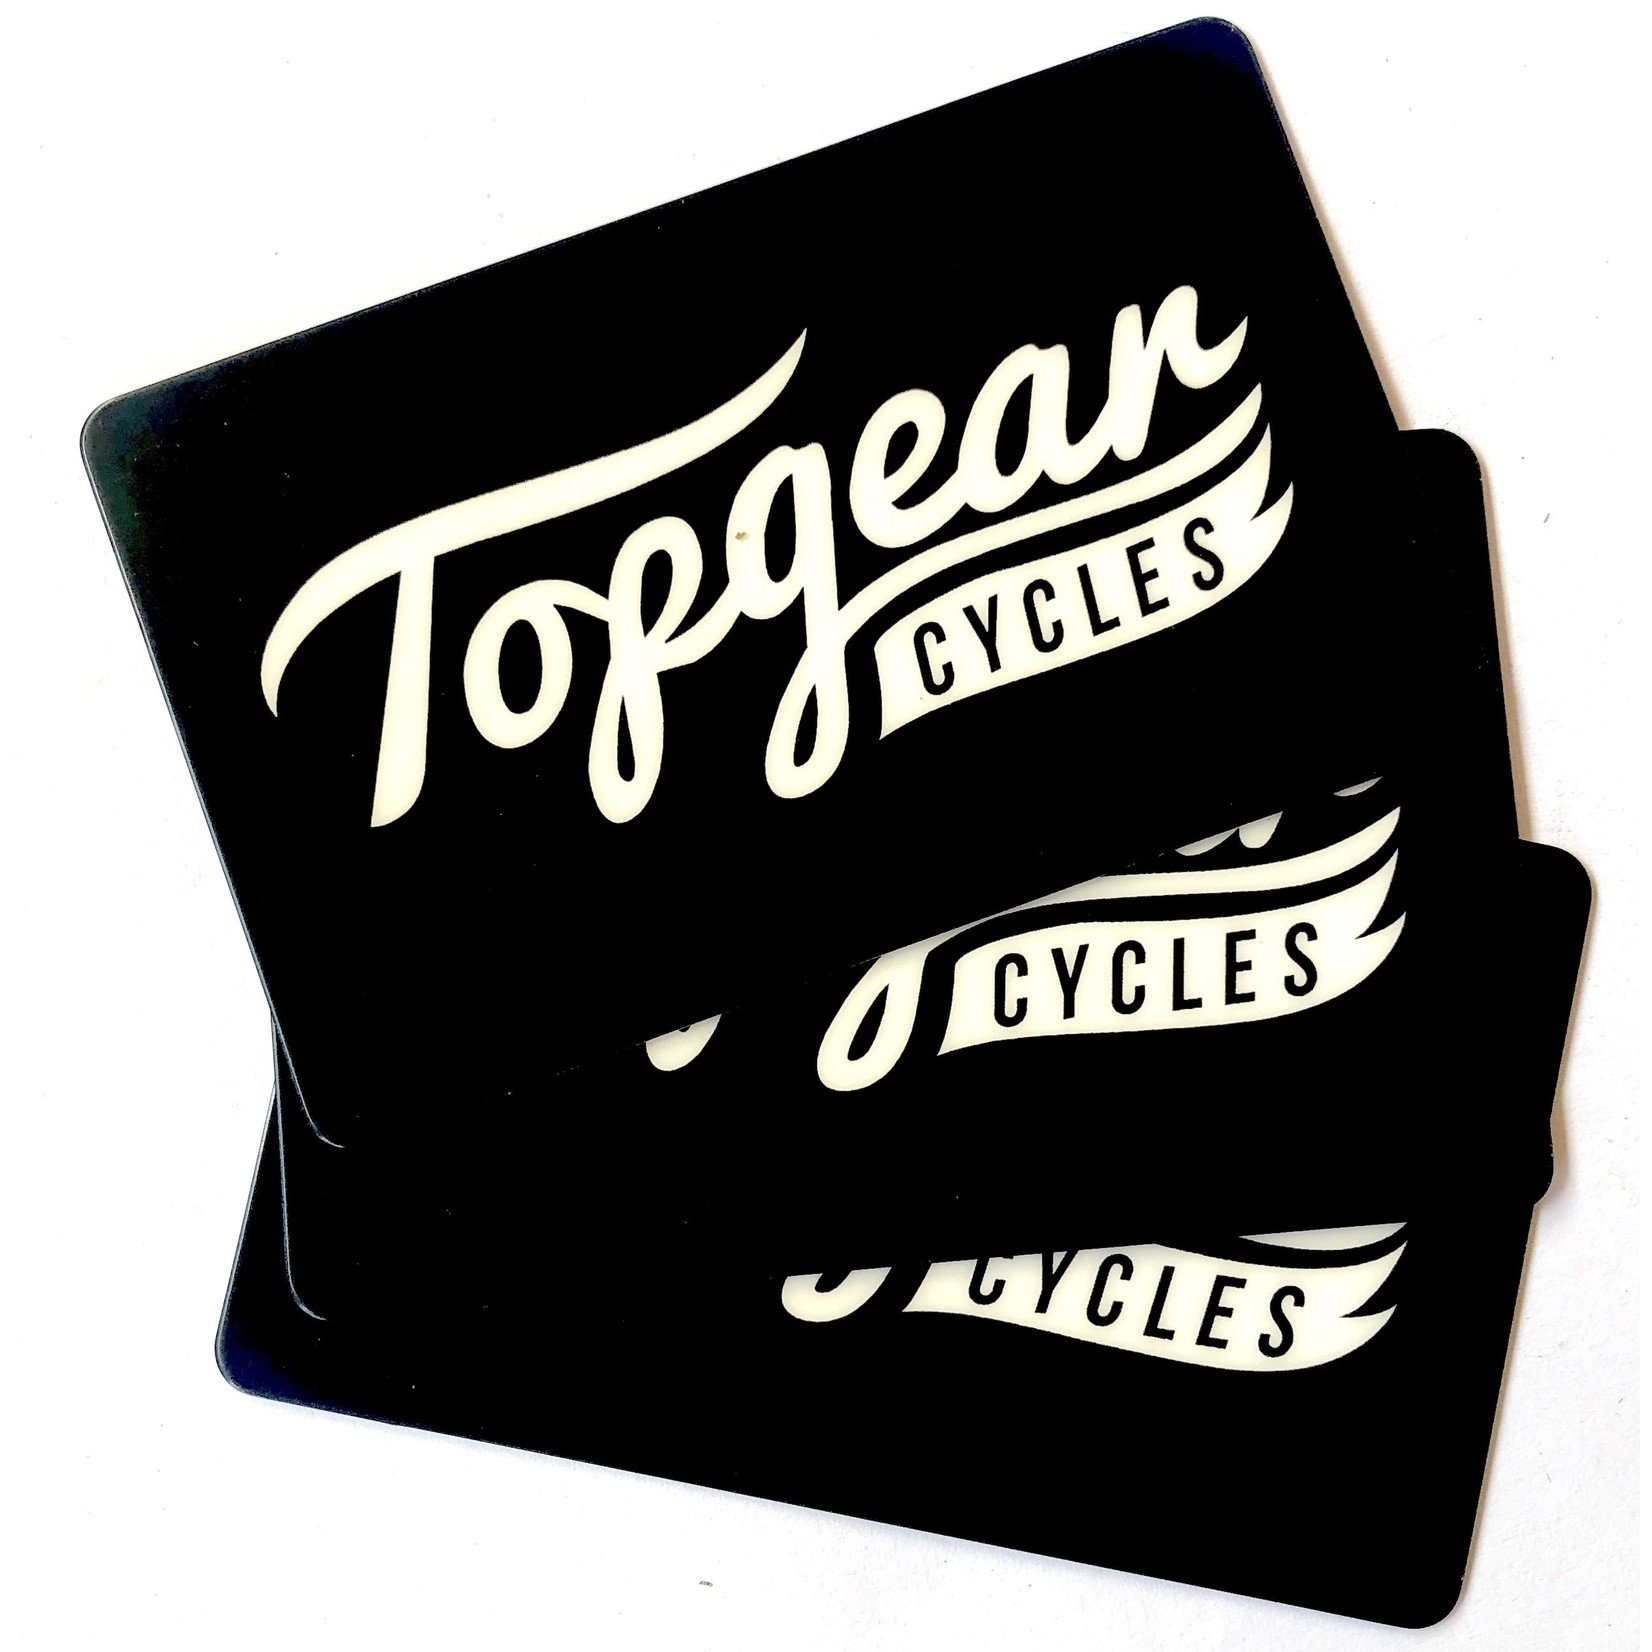 Topgear Cycles Topgear Cycles Gift Card